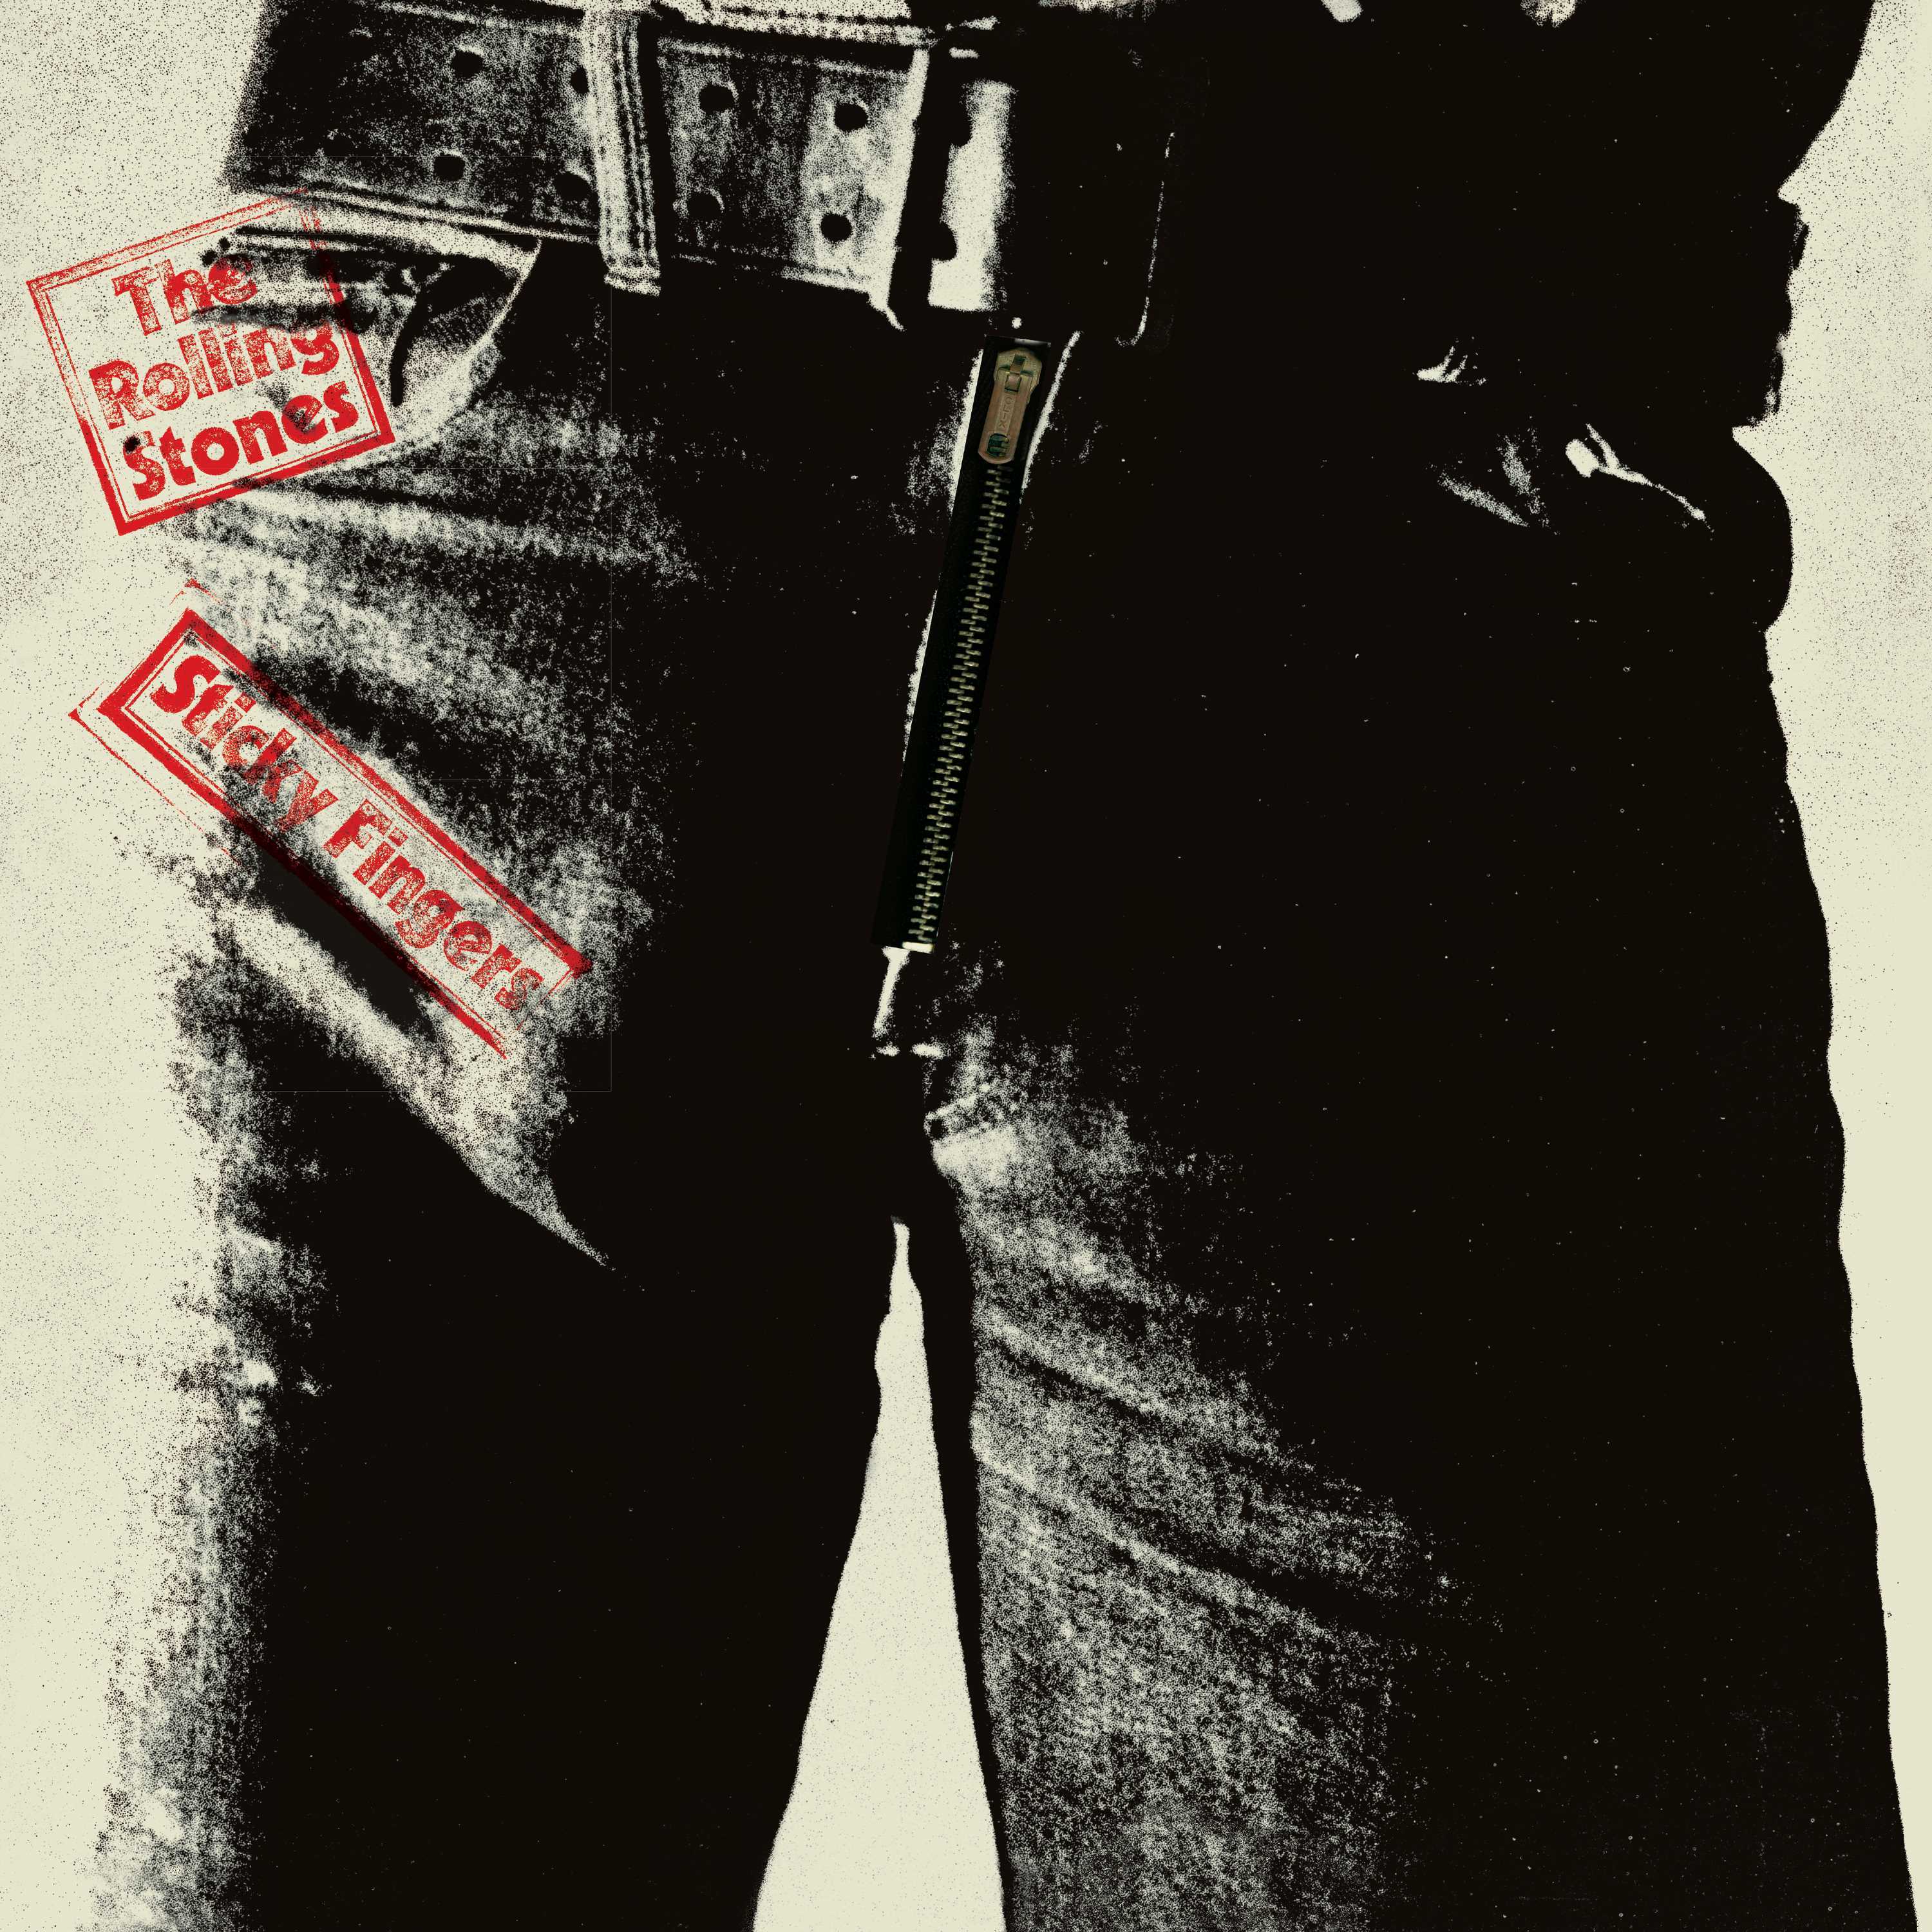 STICKY FINGERS (LP) -- ROLLING STONES THE